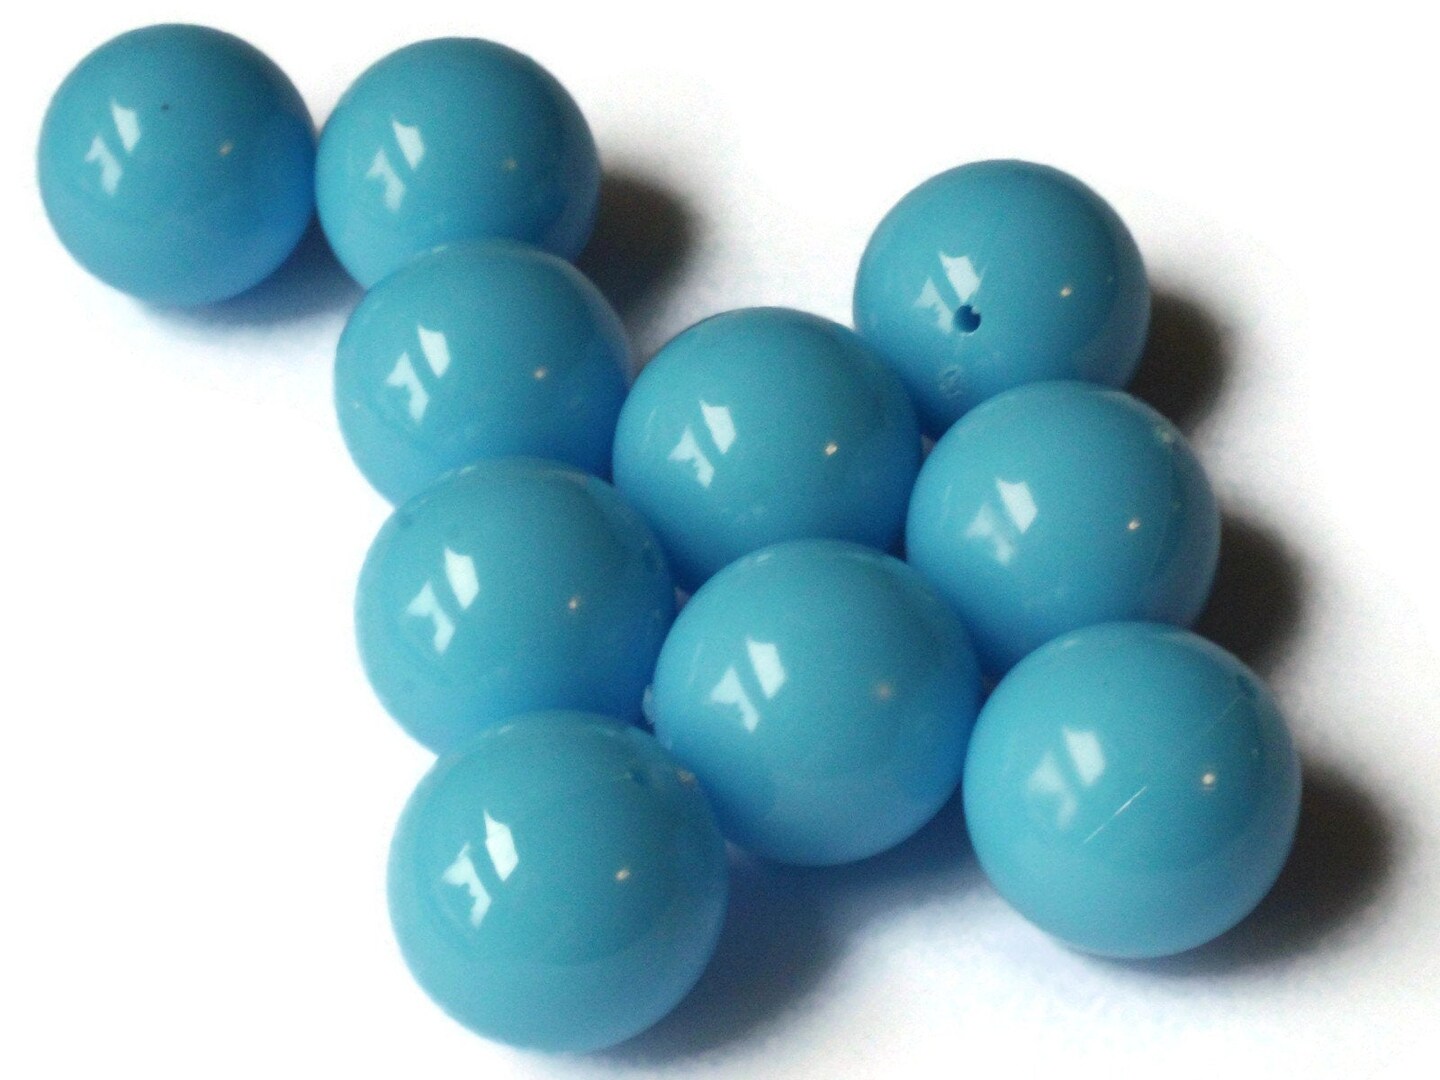 12 20mm Round Blue Vintage Plastic Beads New Old Stock Ball Beads Loose Large Plastic Beads by Smileyboy | Michaels